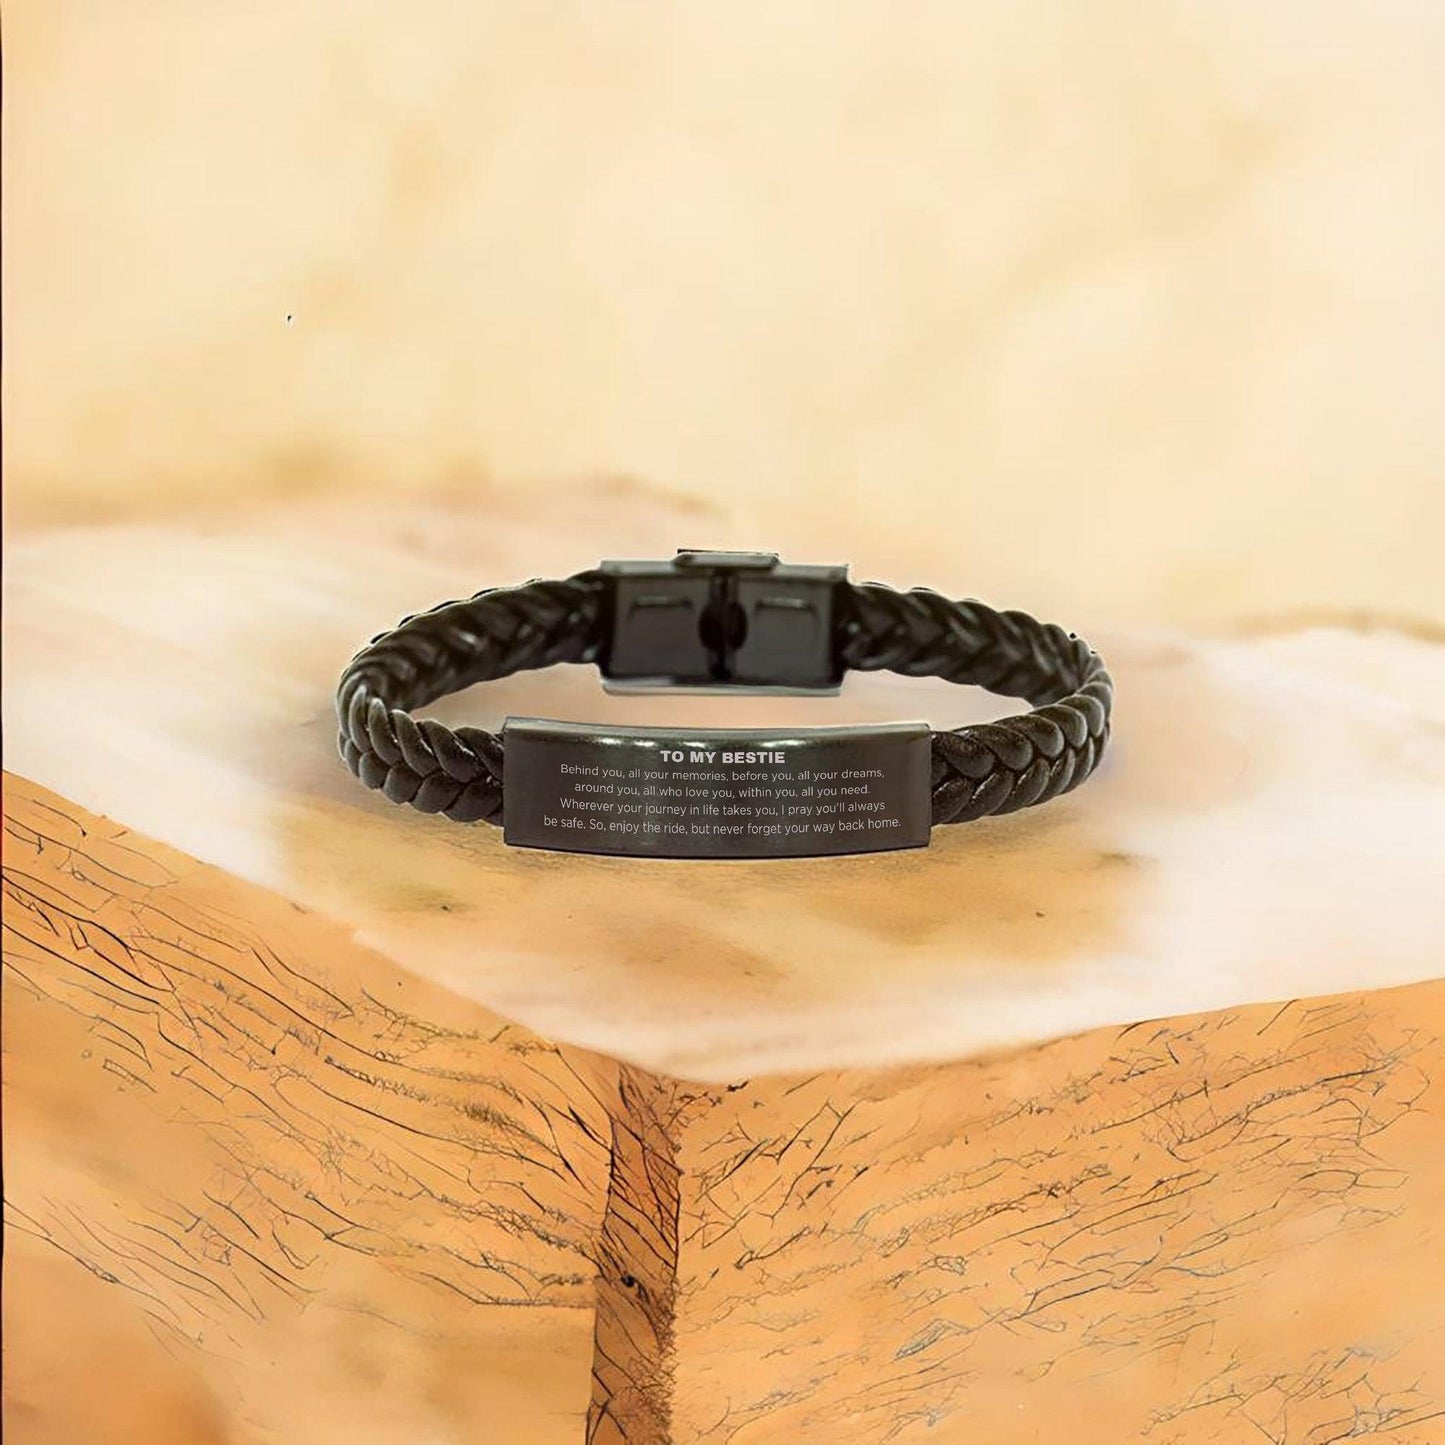 Bestie Braided Leather Bracelet Birthday Christmas Unique Gifts Behind you, all your memories, before you, all your dreams - Mallard Moon Gift Shop